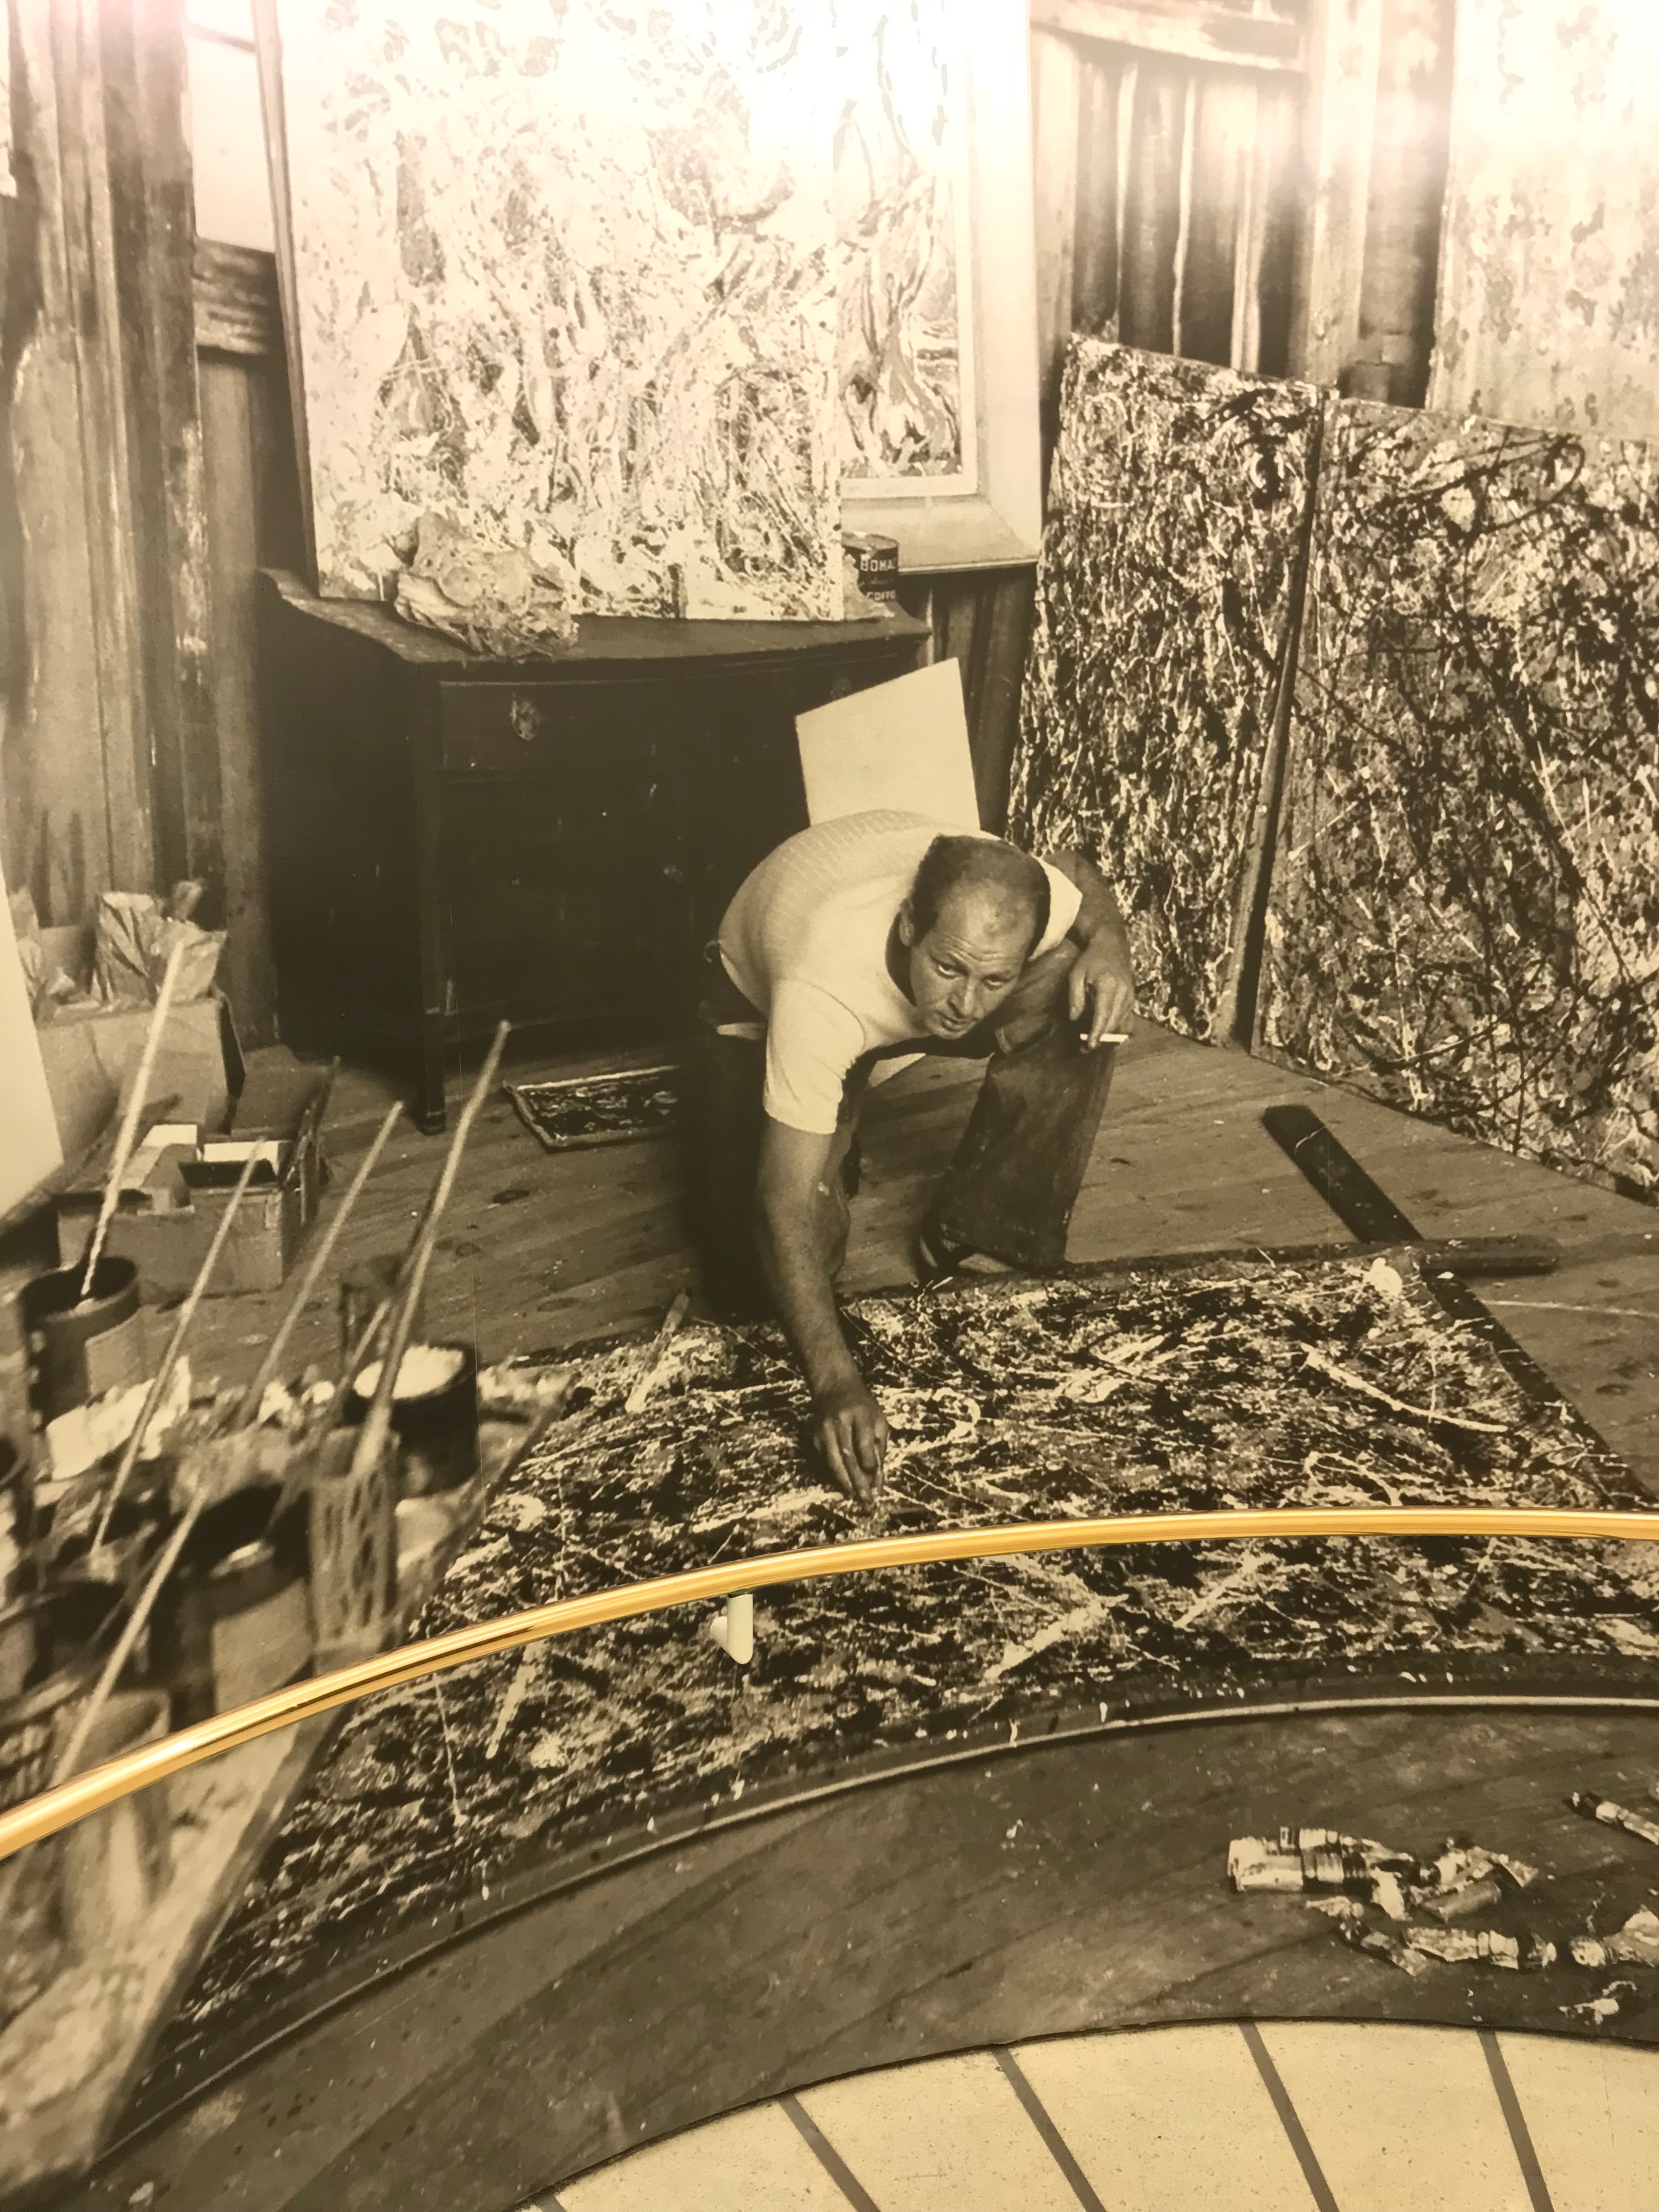 A photo of Jackson Pollock working on Alchemy was plastered on the wall in the Sackler Center for Arts Education at the Guggenheim Museum. (DCNF/Ethan Barton)